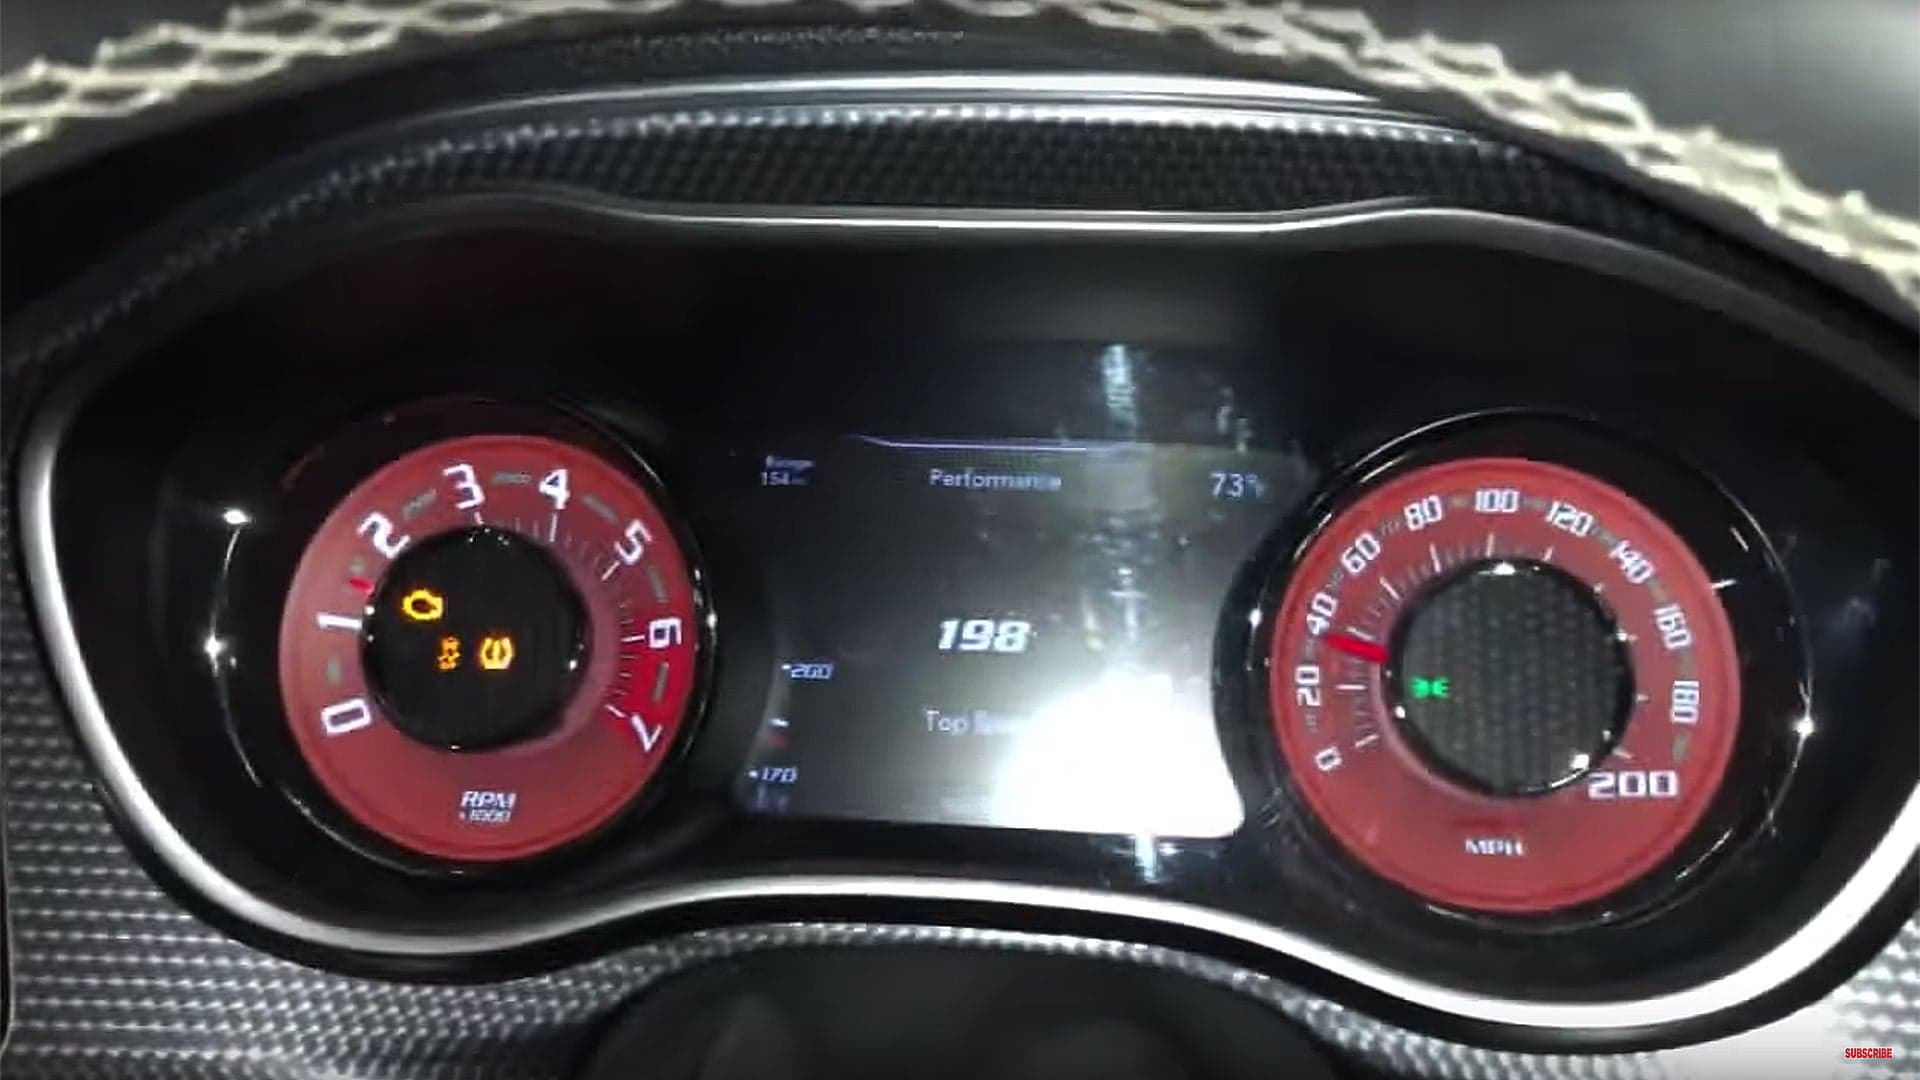 Dodge Hellcat Driver Arrested For Doing 198 MPH on Highway, Posting Video on YouTube